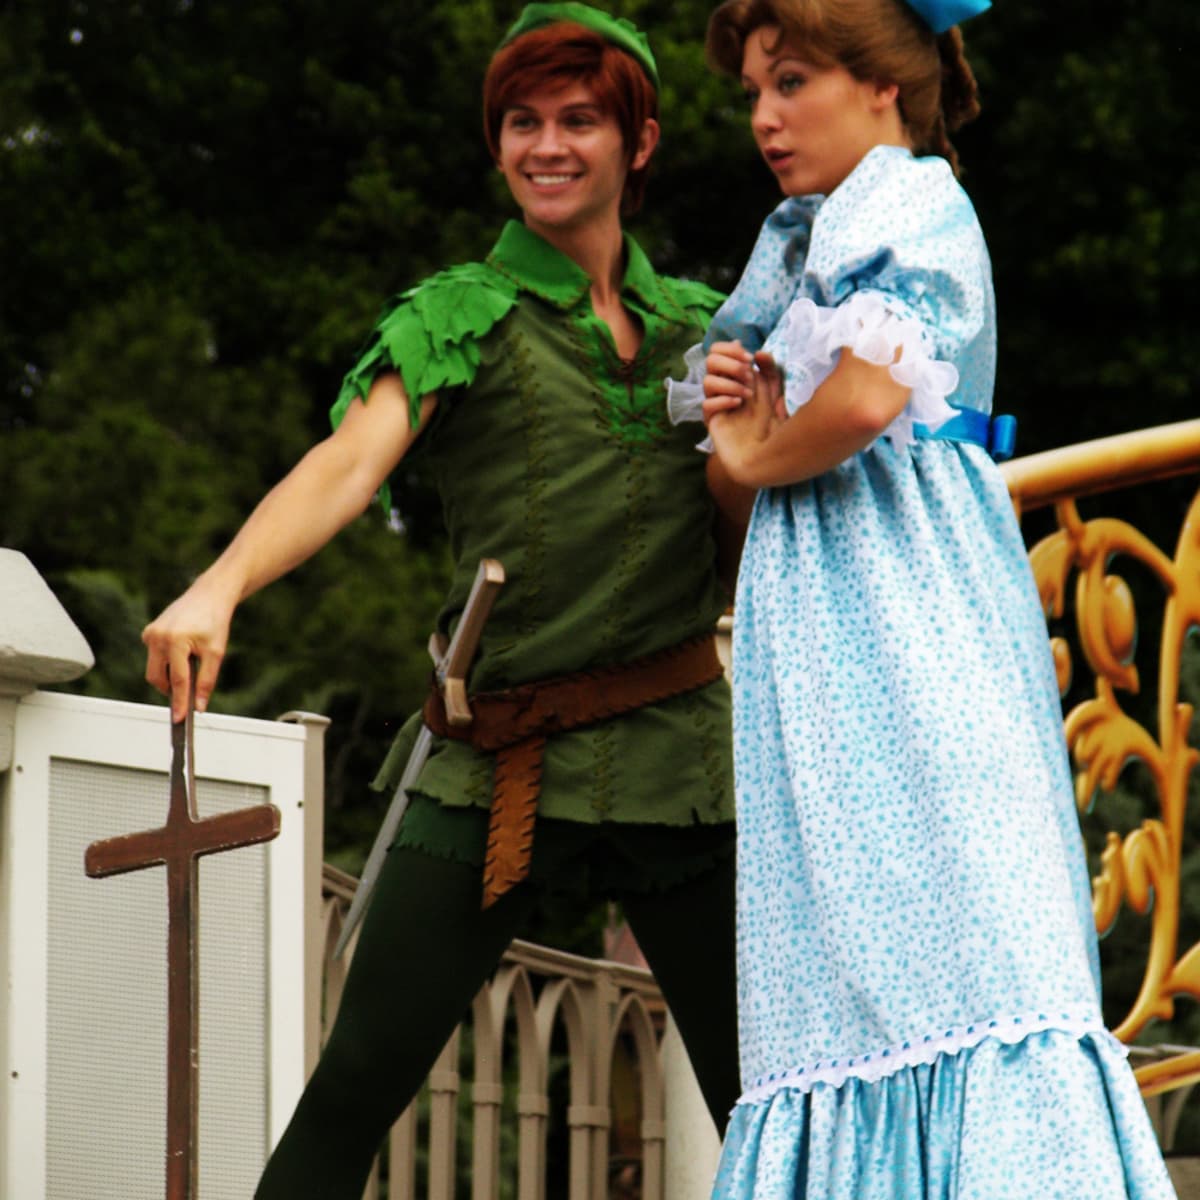 Which Version of Peter Pan Is Your Favorite? : r/movies